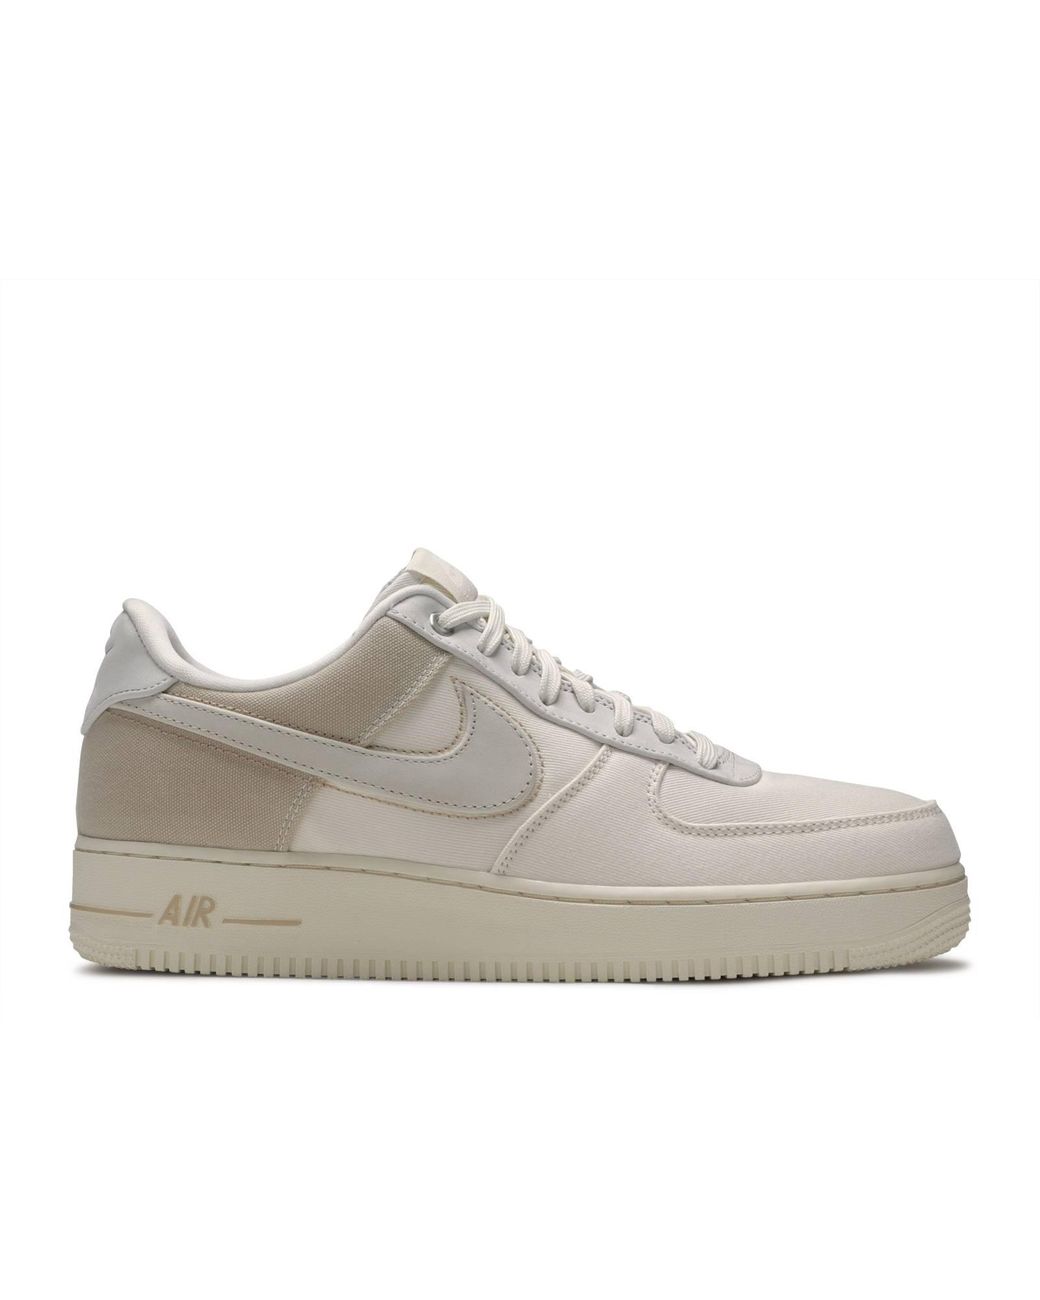 nike air force 1 ivory and cream